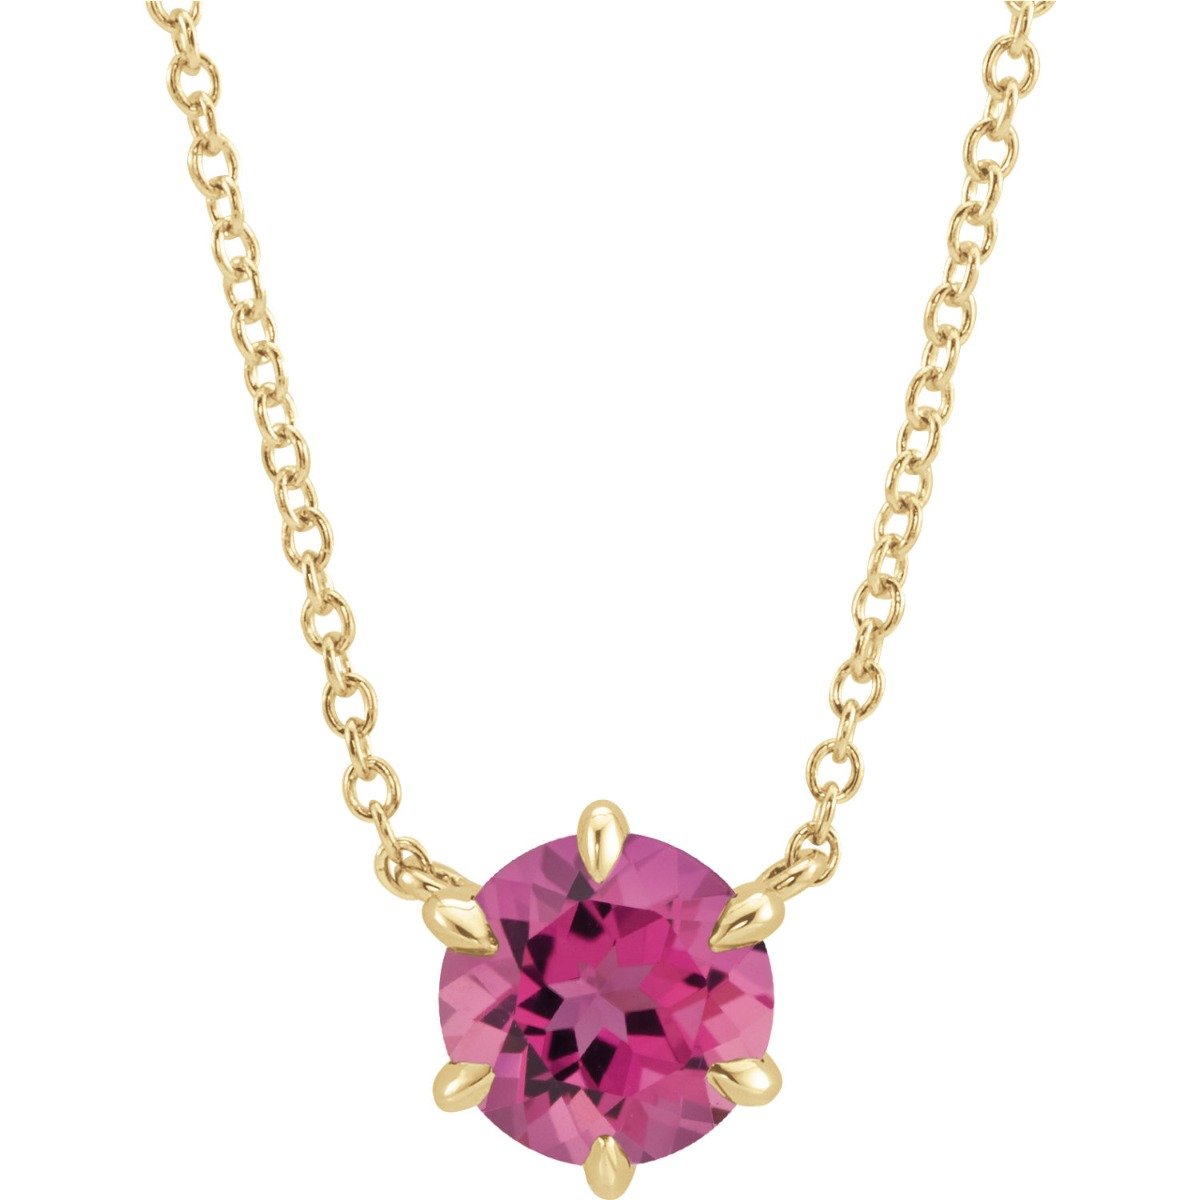 14KT GOLD 0.55 CT PINK TOURMALINE SOLITAIRE NECKLACE Yellow